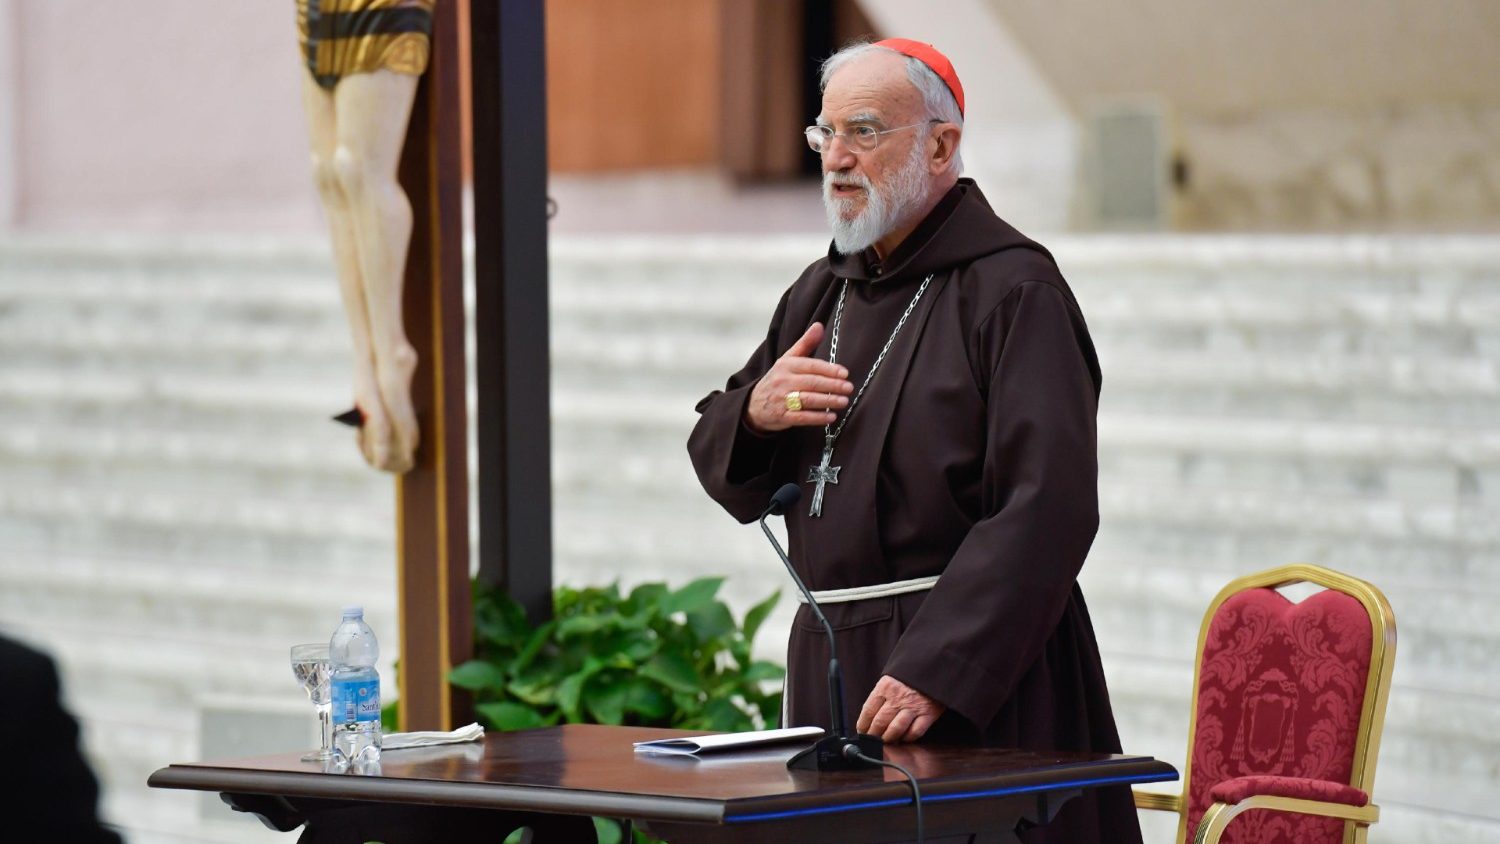 Cardinal Cantalamessa delivers first sermon for Lent 2021